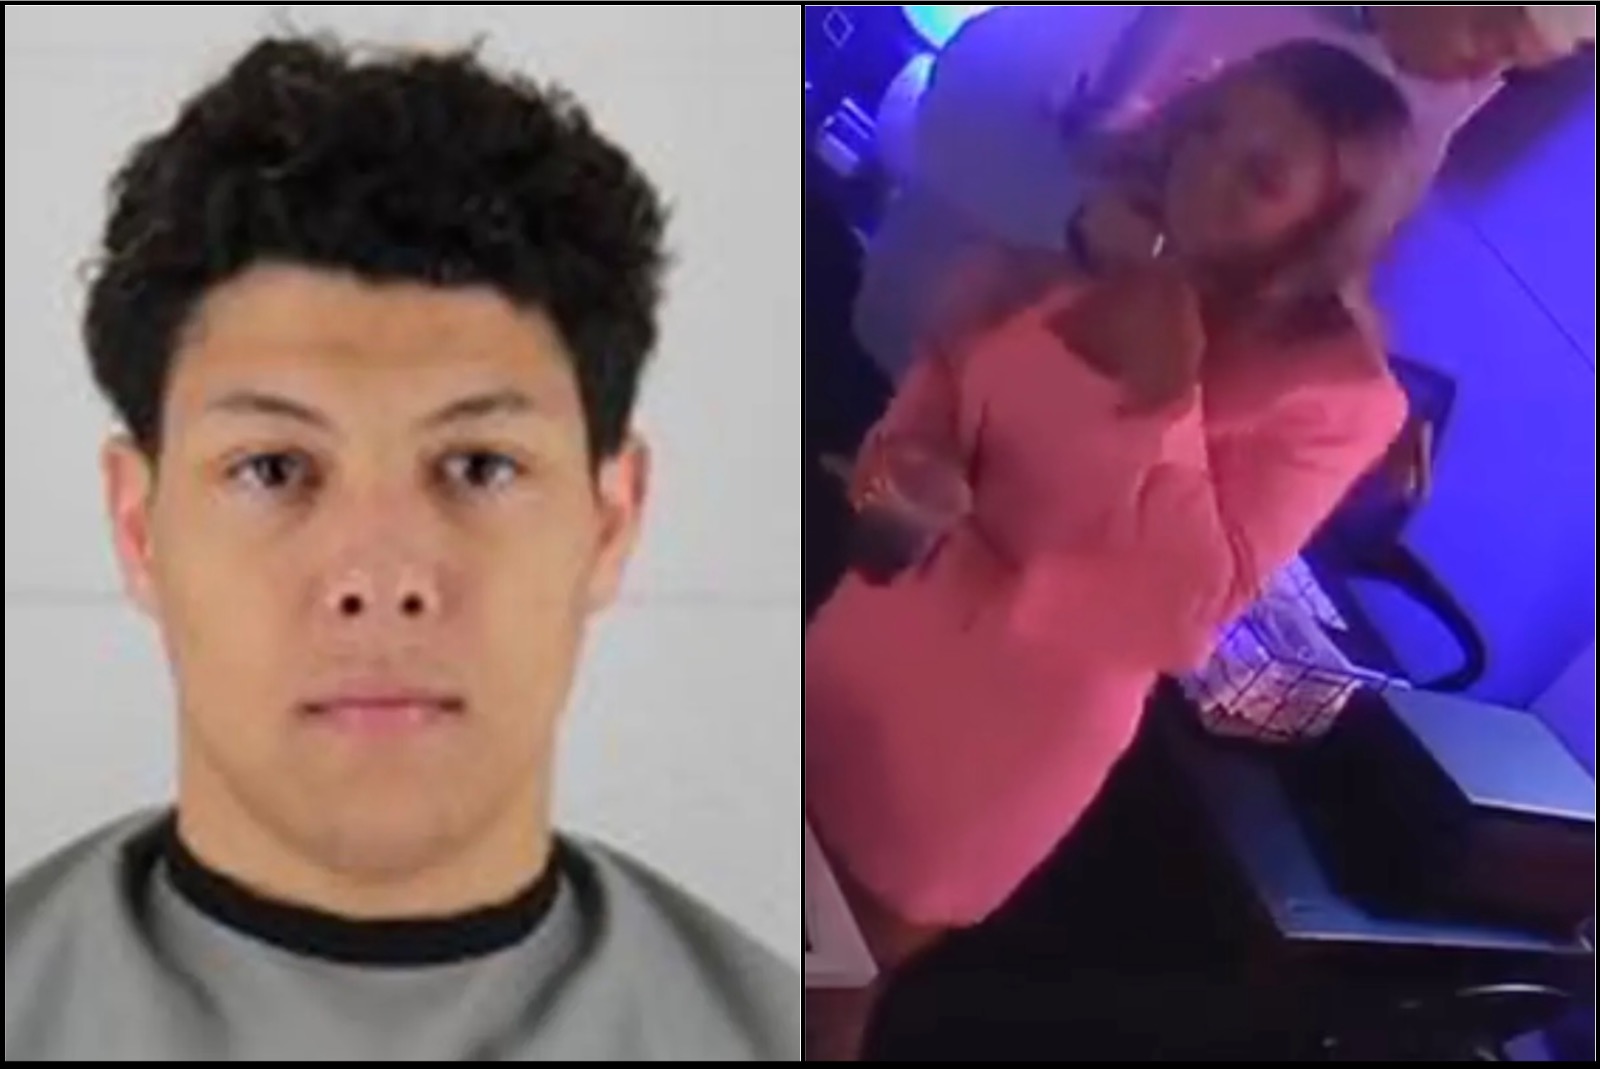 Jackson Mahomes Begs For Sympathy By Saying He’s Being Bullied After Being Arrested For Forcibly Kissing Restaurant Owner